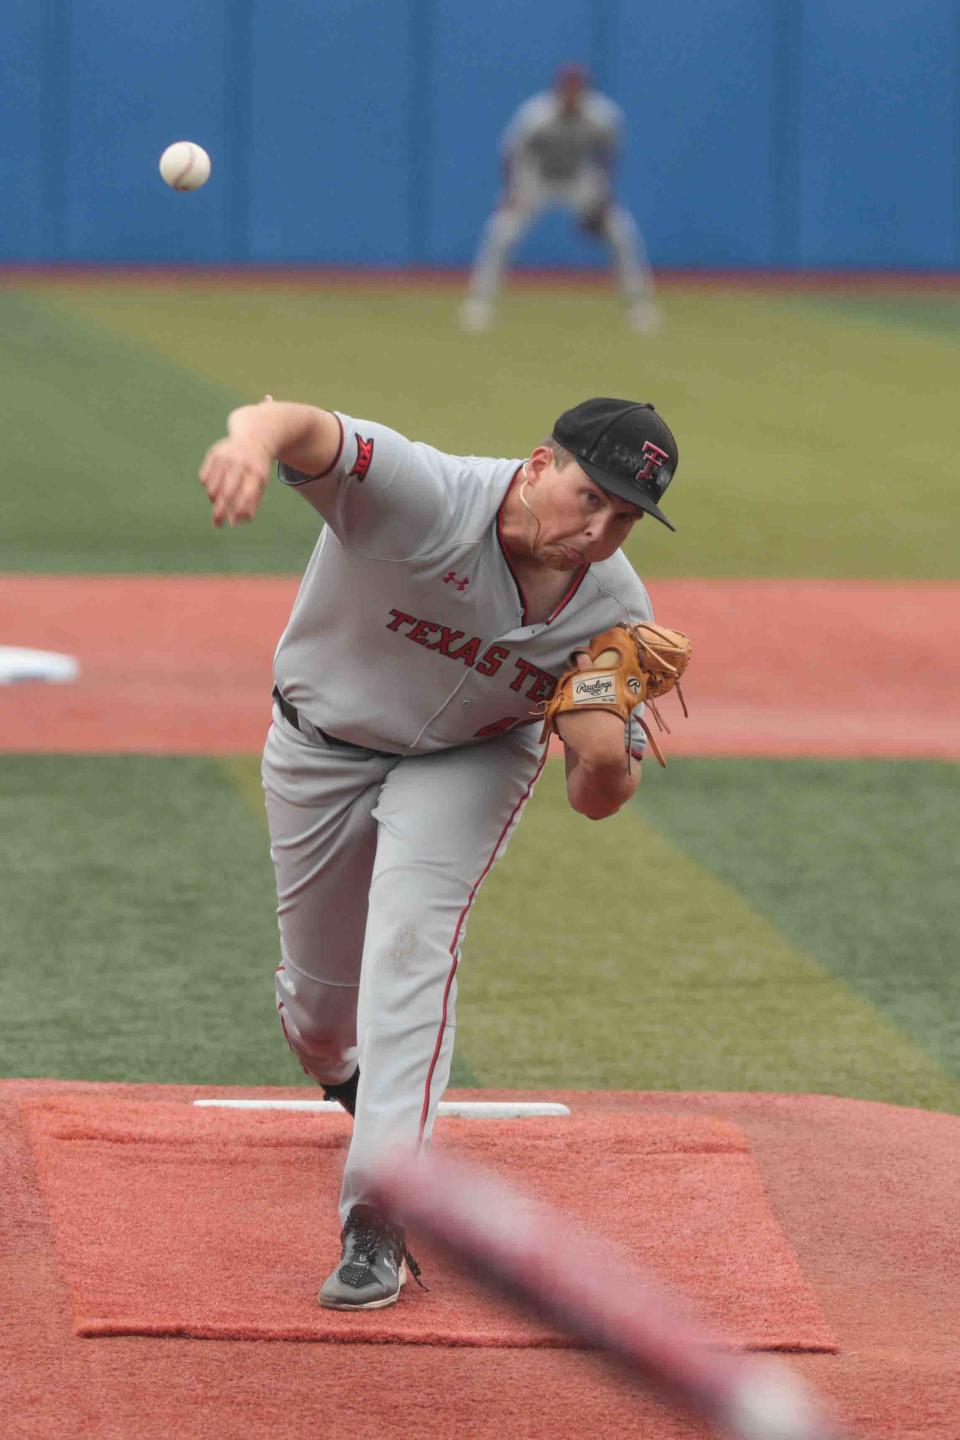 Texas Tech freshman Mac Heuer delivers a pitch in the third inning of a game Sunday against Kansas at Hoglund Ballpark in Lawrence, Kansas. Heuer walked five batters in the fourth inning, was charged with six runs in 3 2/3 and took the loss in a 7-3 setback.